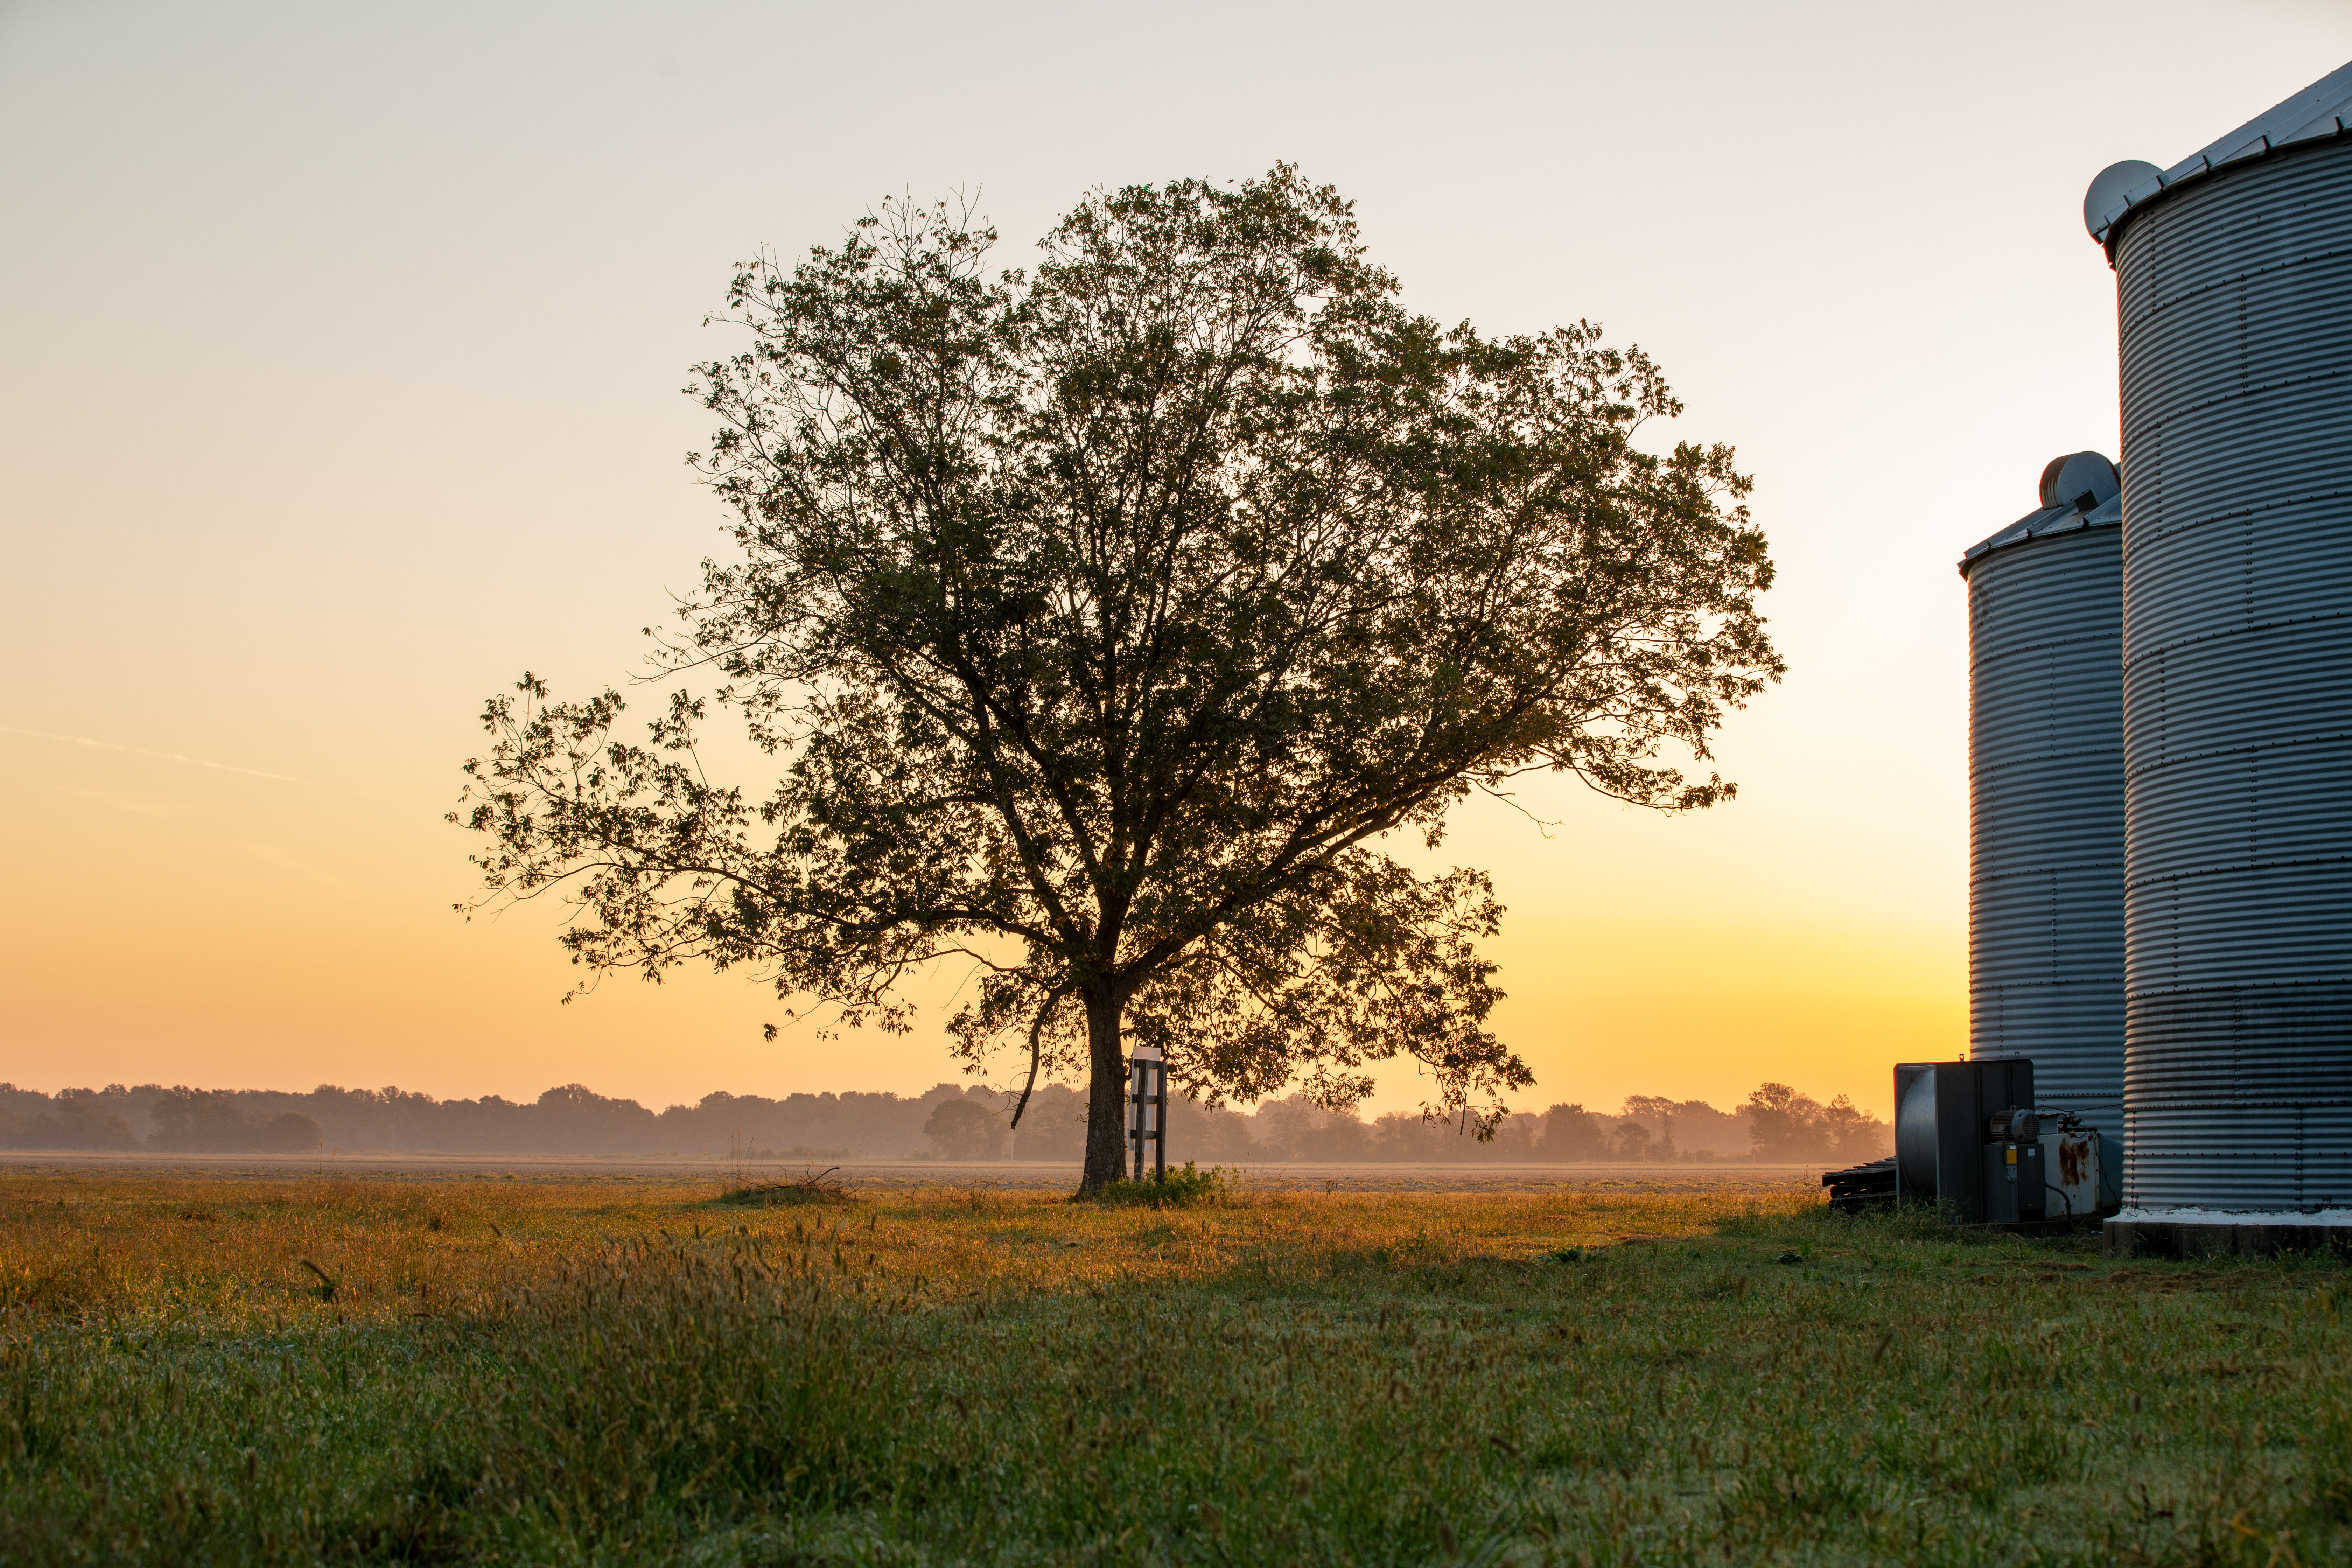 Tree in a country field (photo by Colin Cruickshank)